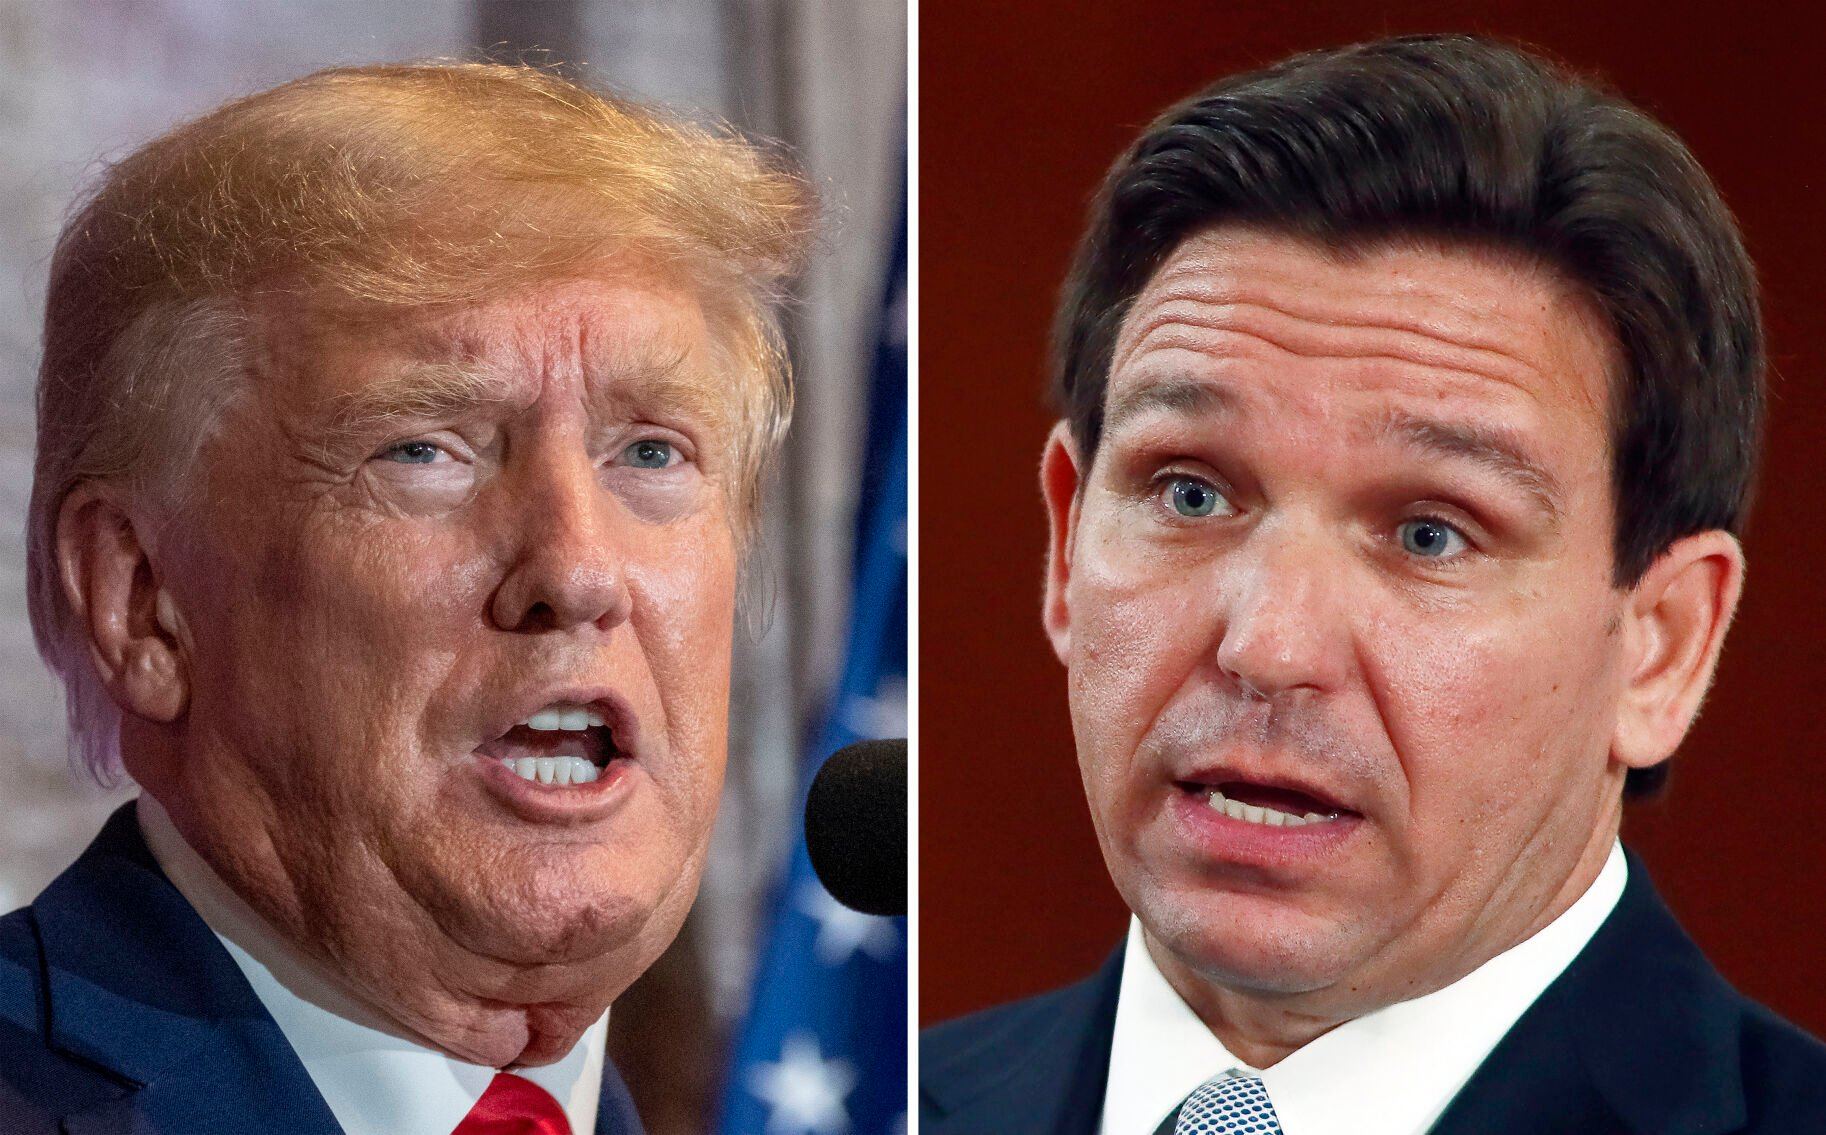 <p>FILE - This combination of the photos shows former President Donald Trump, left, and Florida Gov. Ron DeSantis, right. DeSantis’ allies are gaining confidence in his White House prospects as former President Donald Trump’s legal woes mount. Trump, a 2024 Republican presidential candidate, is facing possible criminal charges in New York, Georgia and Washington. The optimism around DeSantis comes even as a collection of Republican officials and MAGA influencers raise concerns about the Florida governor’s readiness for national stage. (AP Photo/File)</p>   PHOTO CREDIT: Phil Sears 